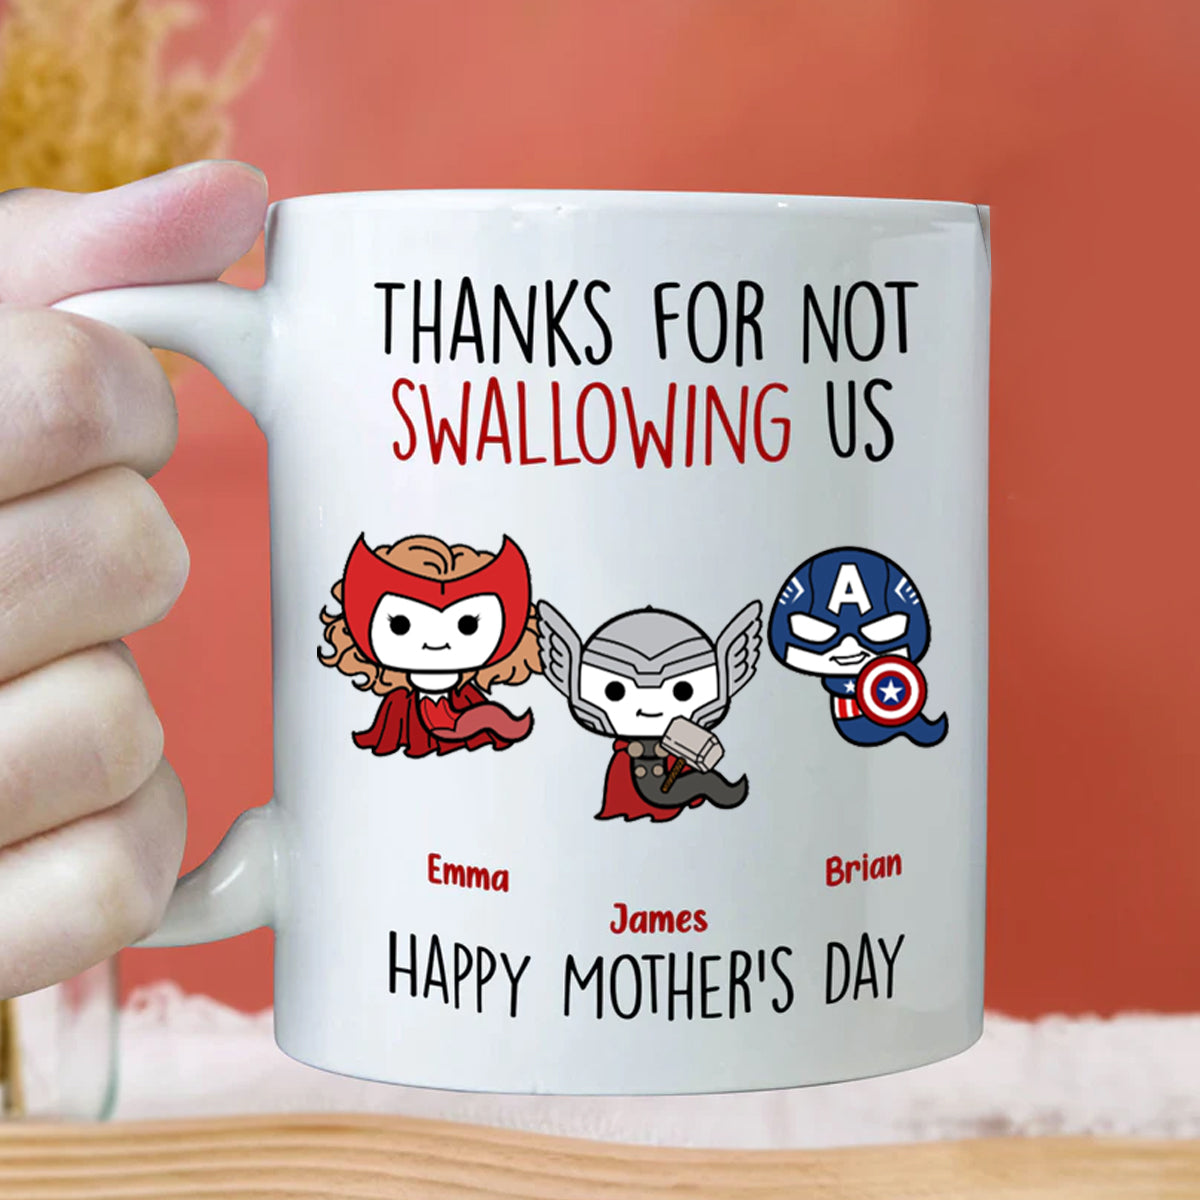 Thank Super Mom For Not Swallowing Us - Gift For Mom, Grandmother - Personalized Ceramic Mug